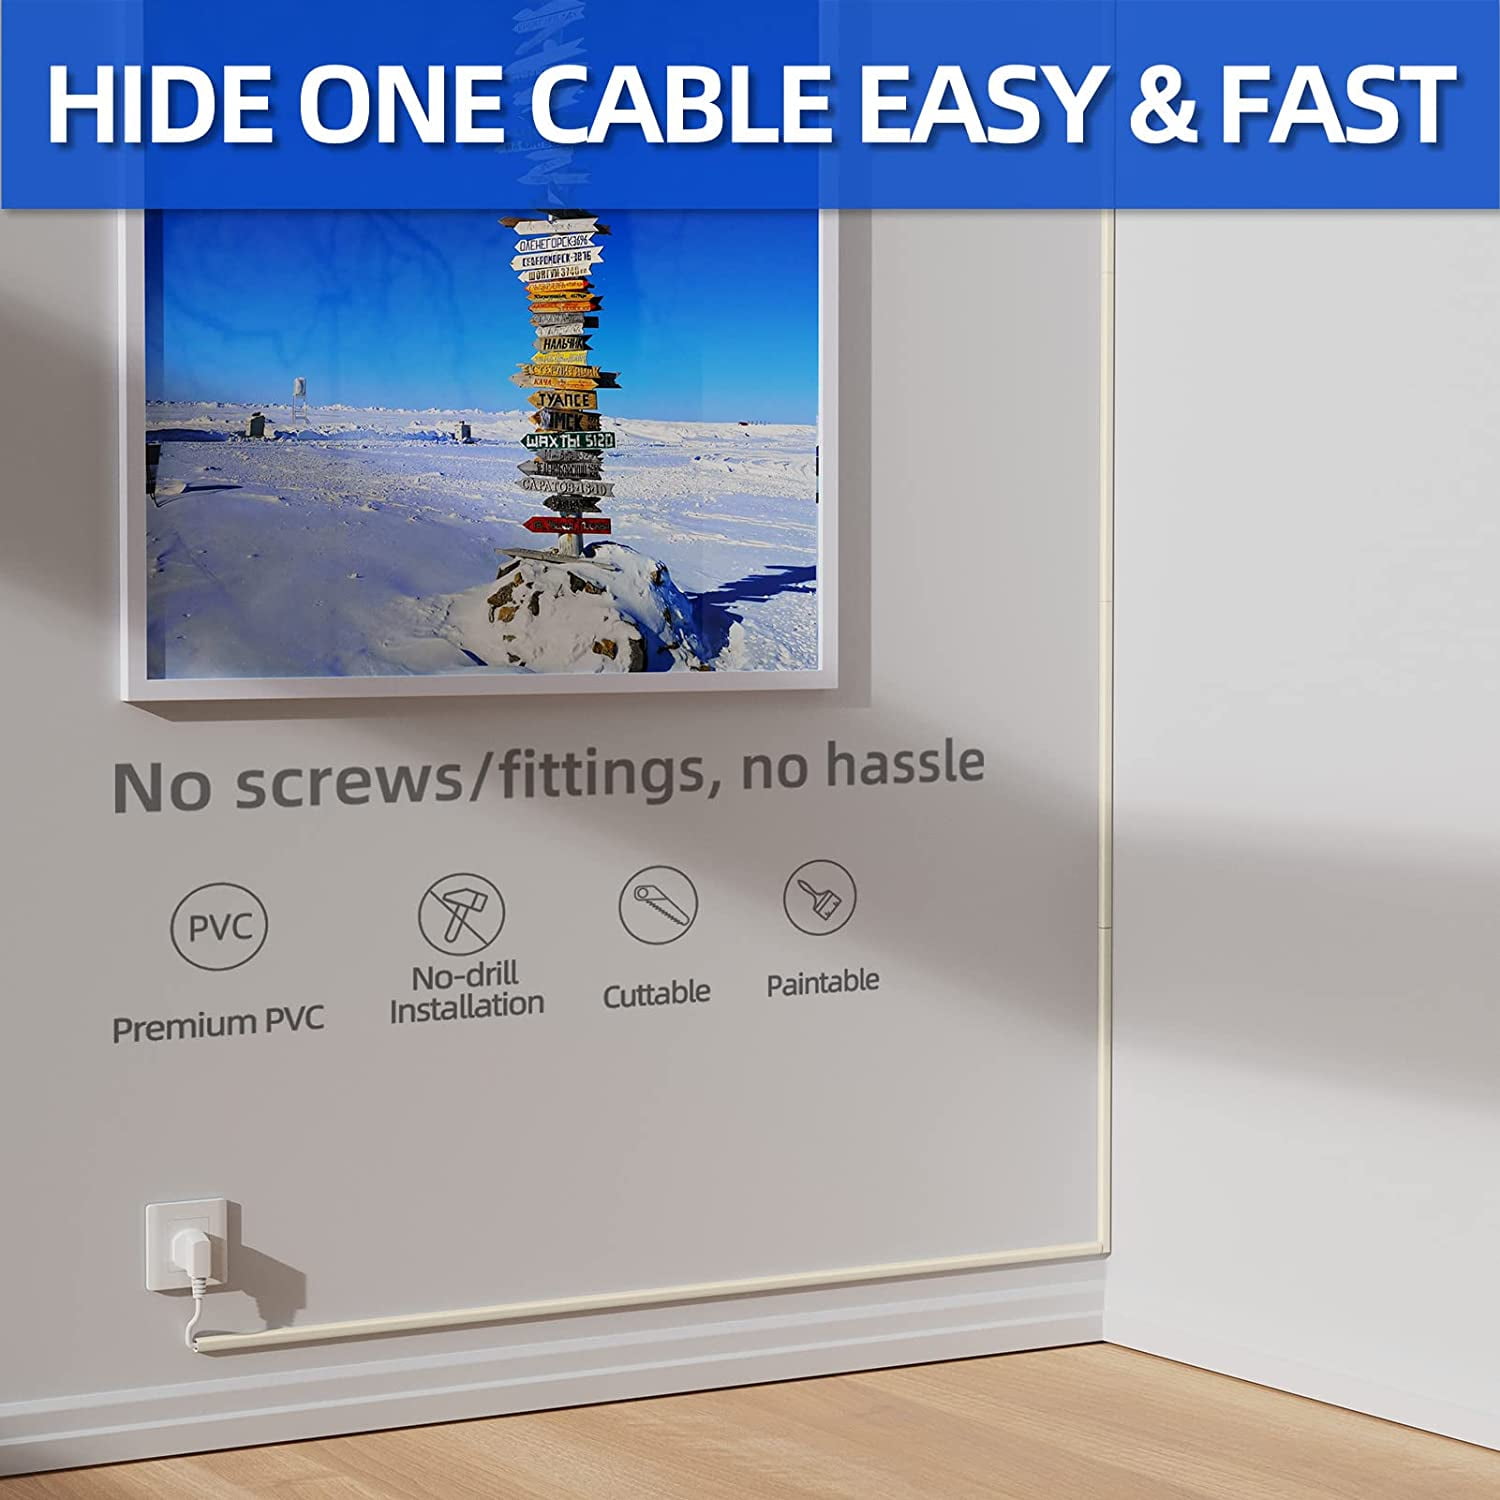 306” Cord Hider - Cord Cover Wall - Paintable Cable Concealer, Wire hiders  for TV on Wall - Cable Management Cord Hider Wall with Connectors 